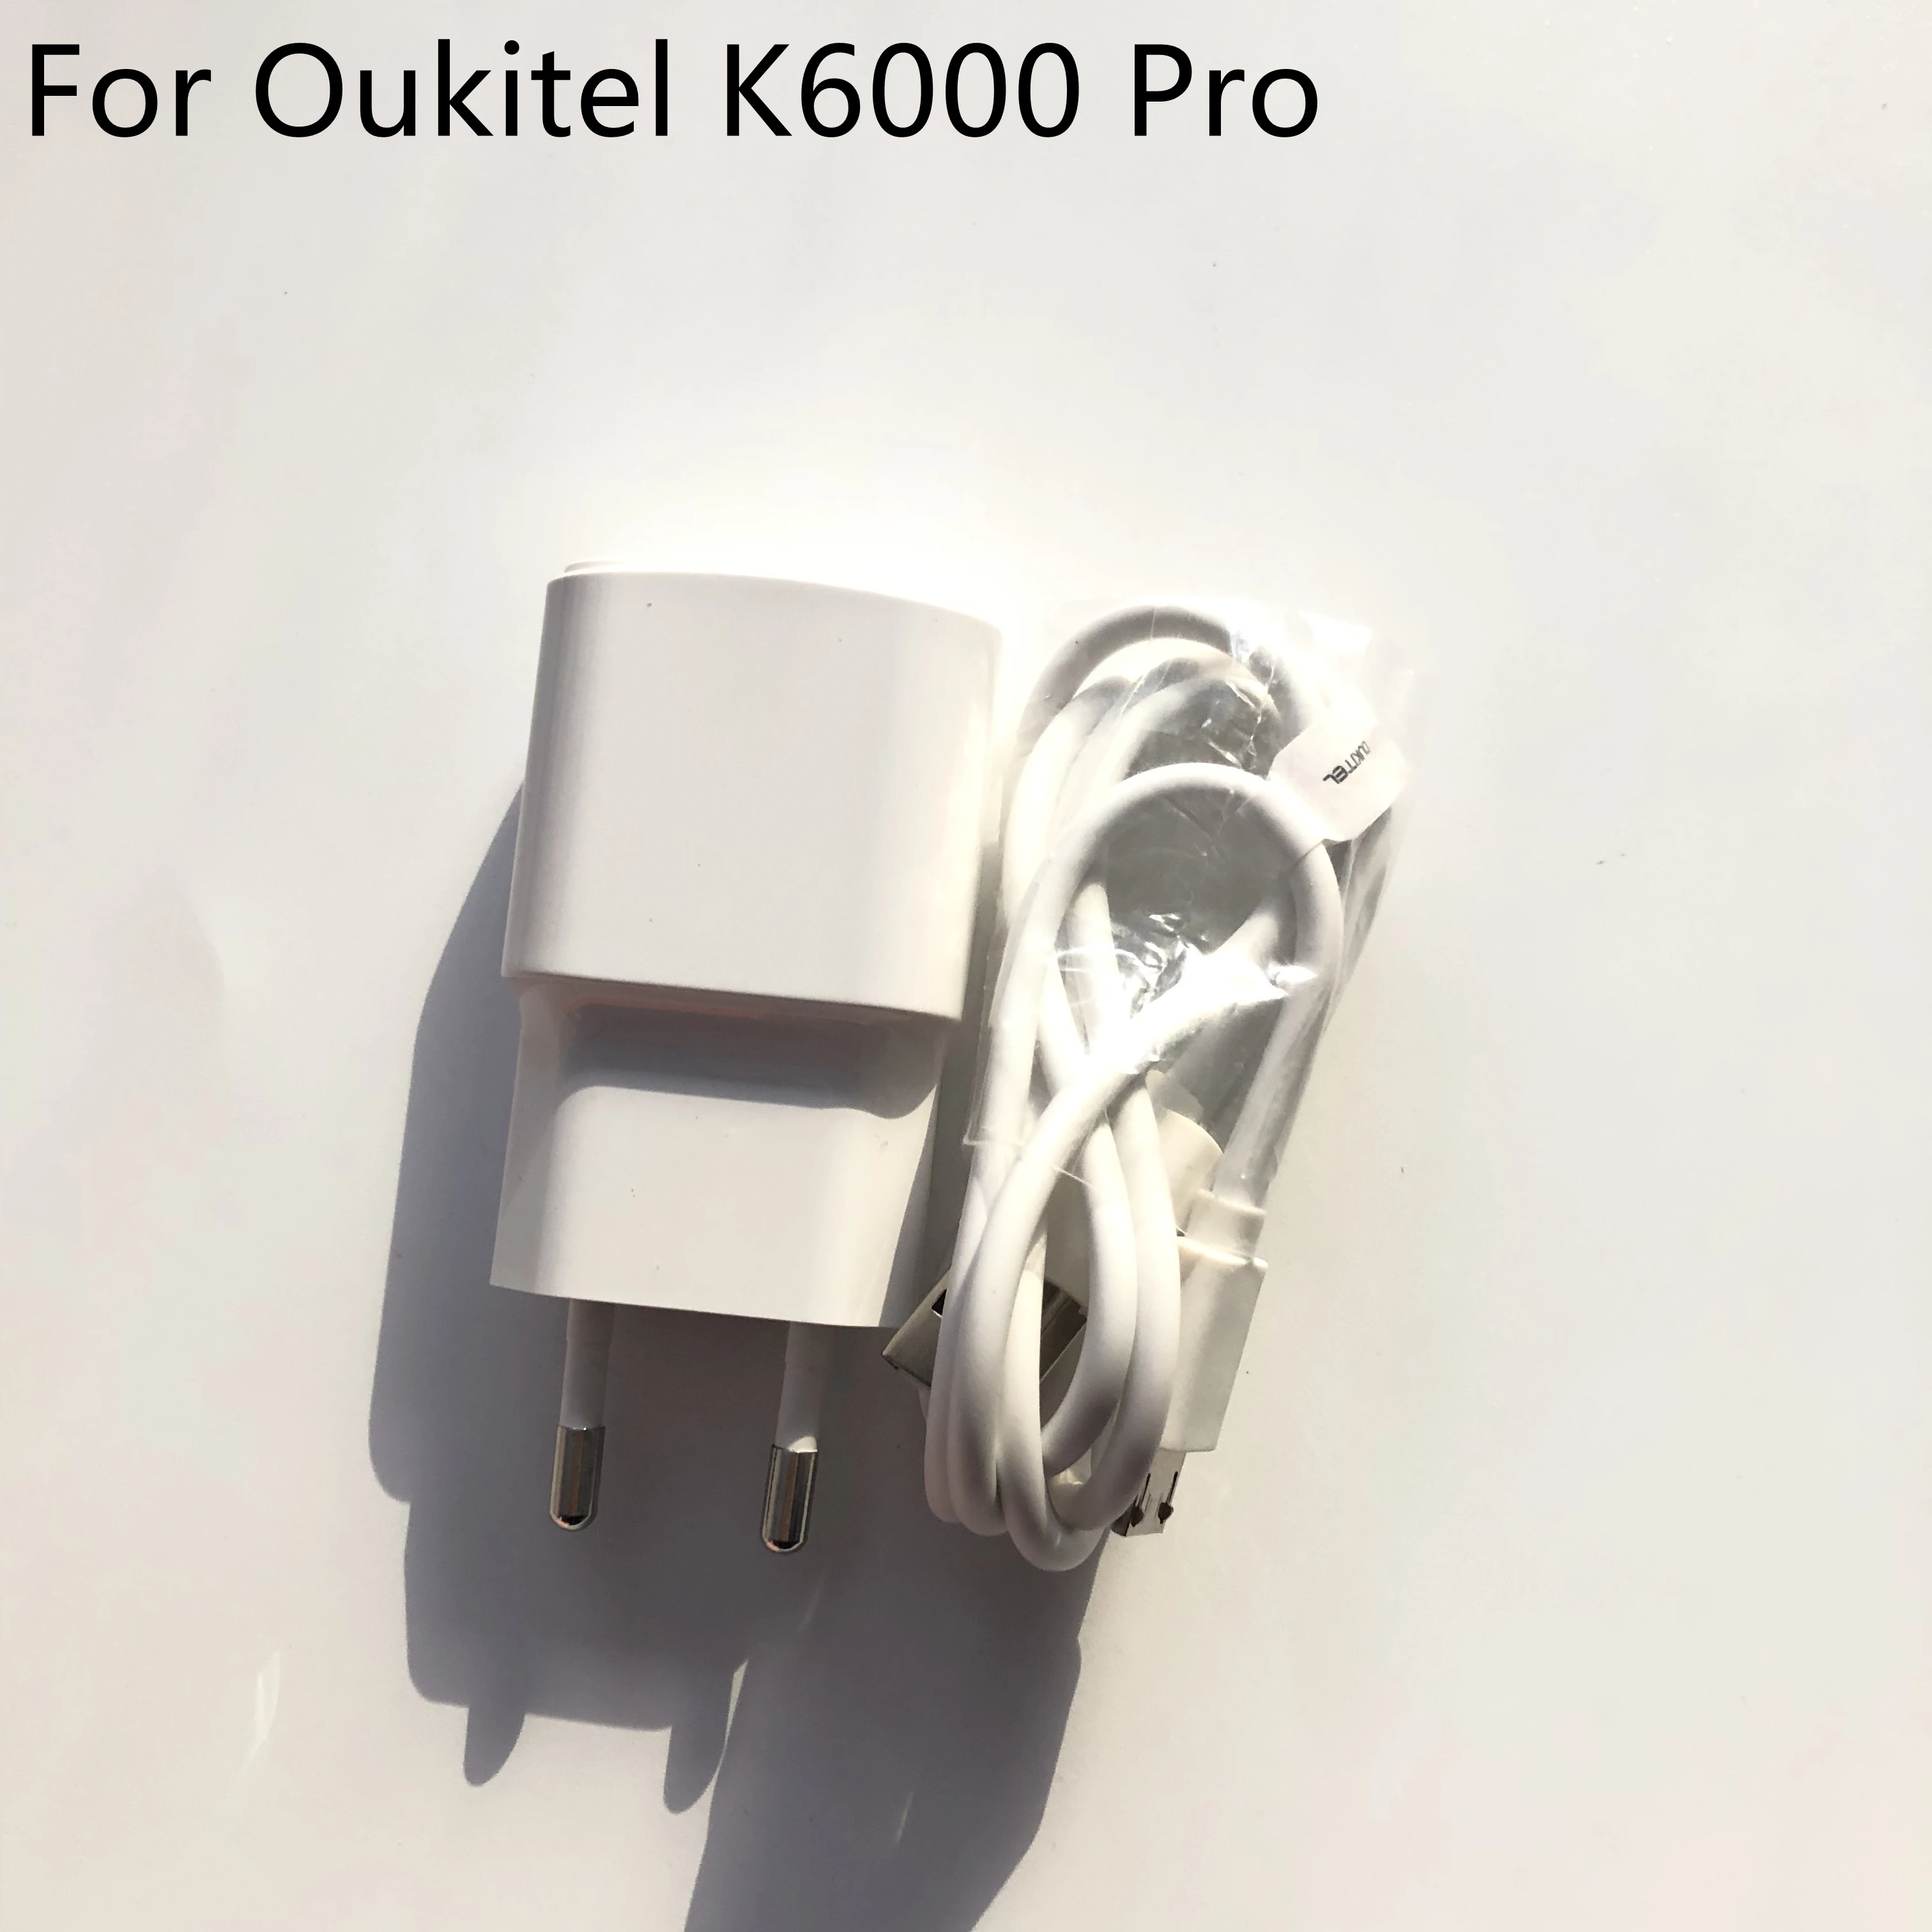 

New Oukitel K6000 Travel Charger + USB Cable USB Line For Oukitel K6000 Pro 5.5" FHD 1920x1080 MT6753 Octa Core Free Shipping